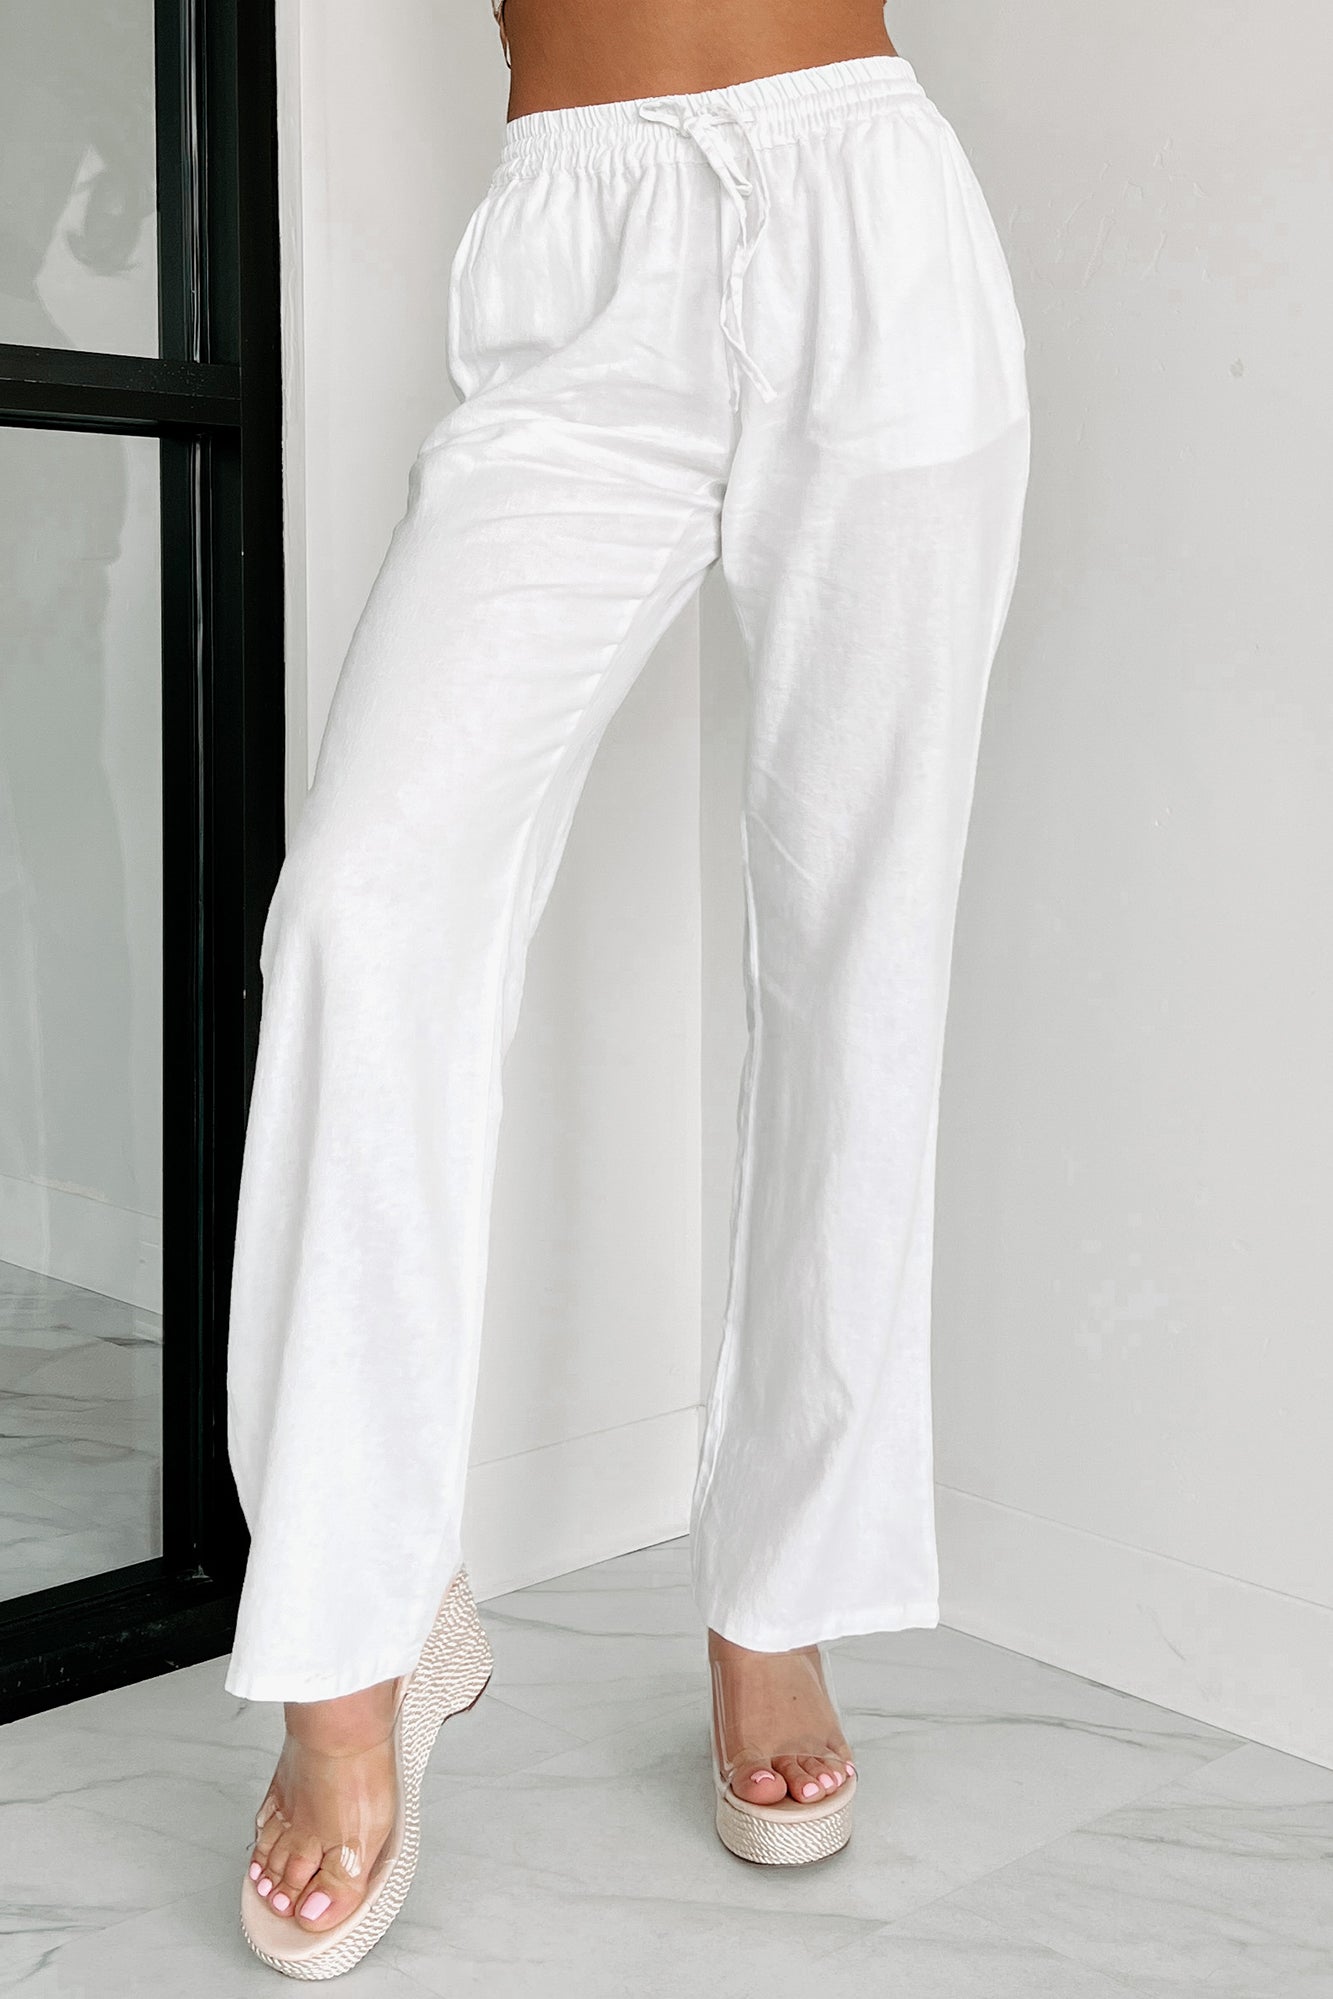 Zhibimo Spring 2022 Lime White Thick Terry Knit Fabric Brushed Elastic  Waist Drawstring Carrot Pants for